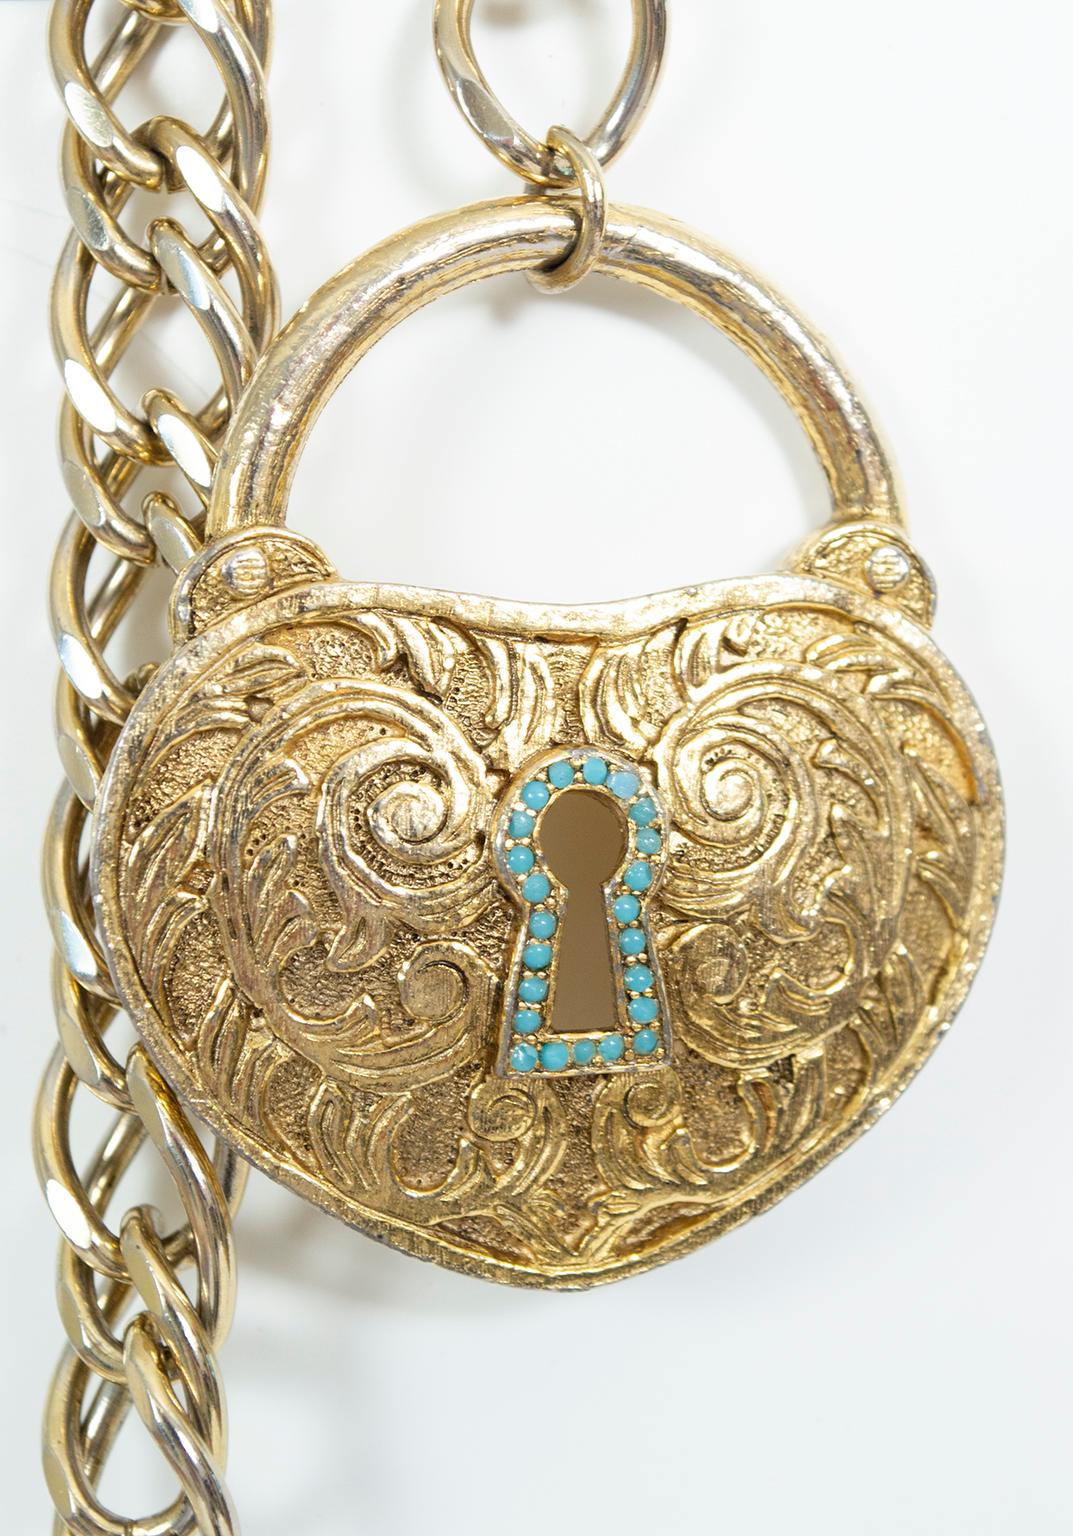 Women's Pauline Rader Gold Lock and Key to My Heart Chain Belt Necklace – XS-S, 1960s For Sale